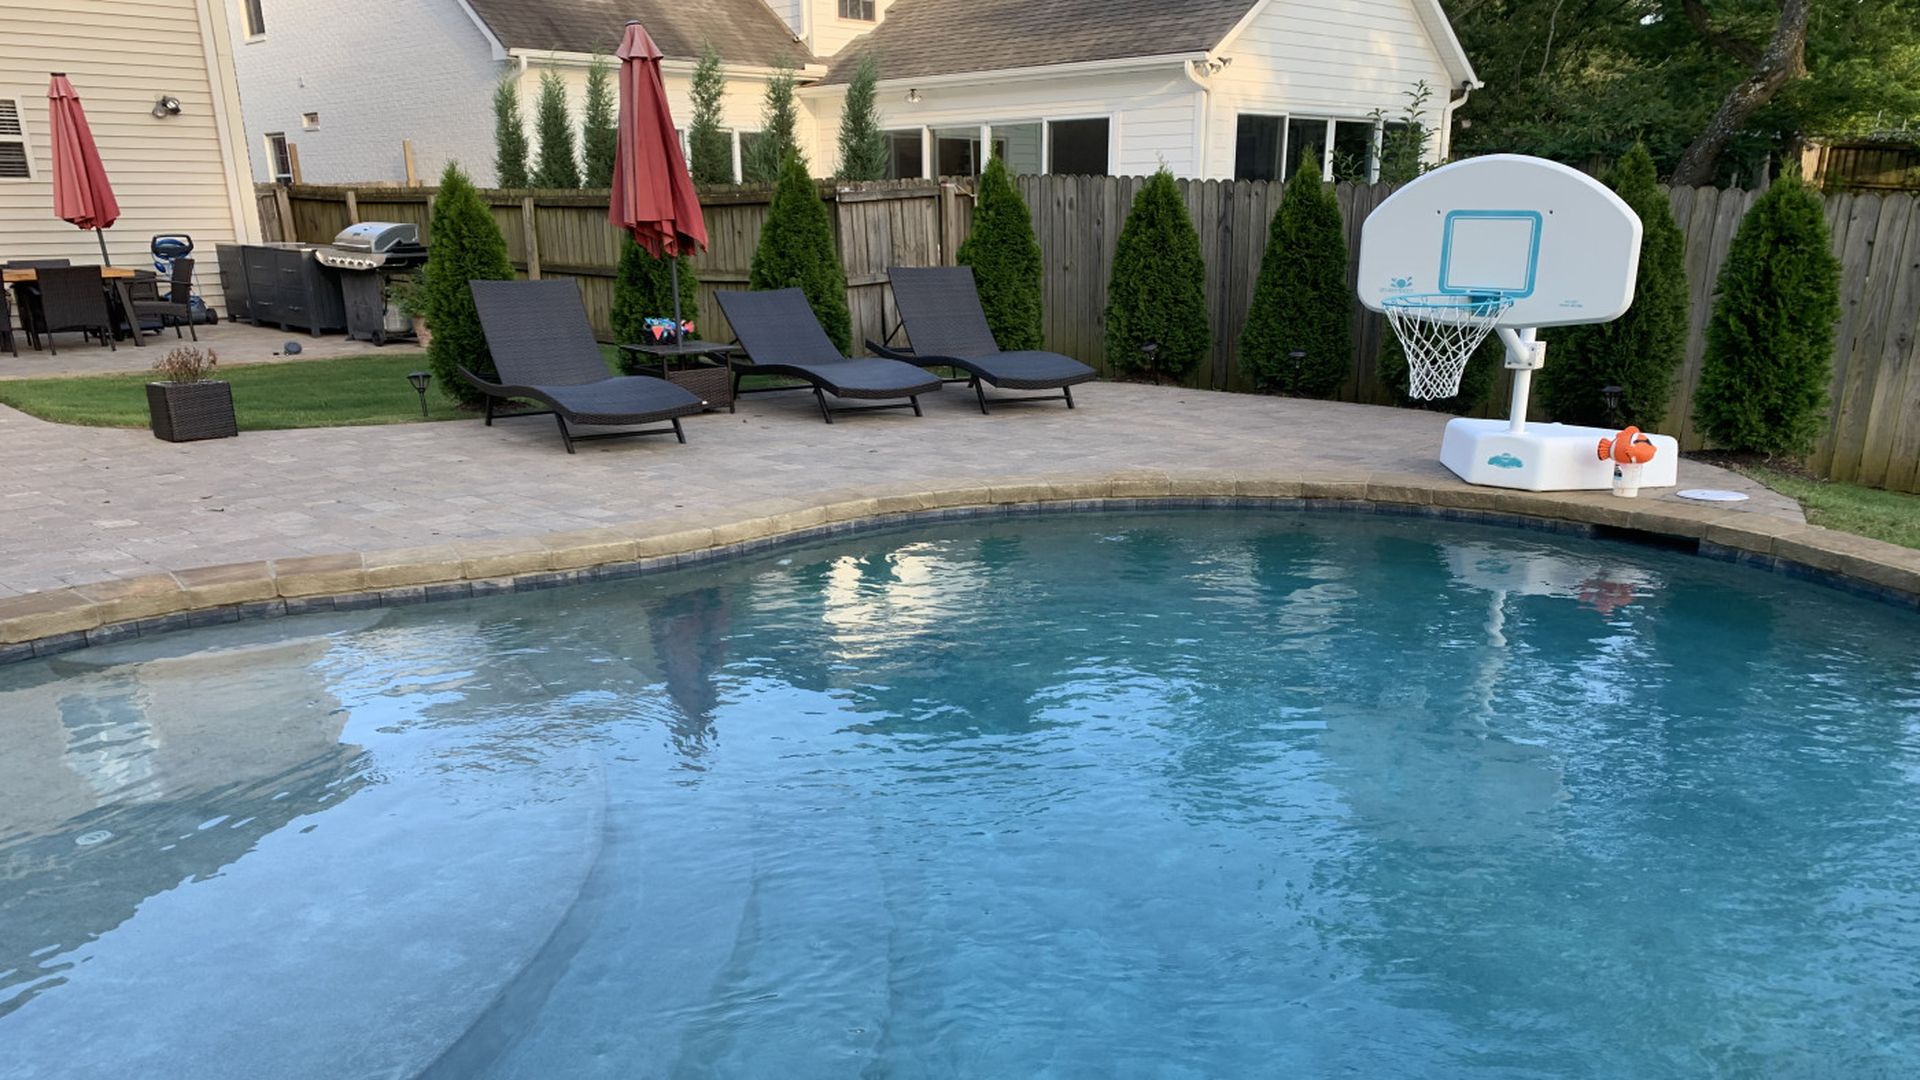 3 private pools to rent around NWA starting at $30 an hour - Axios